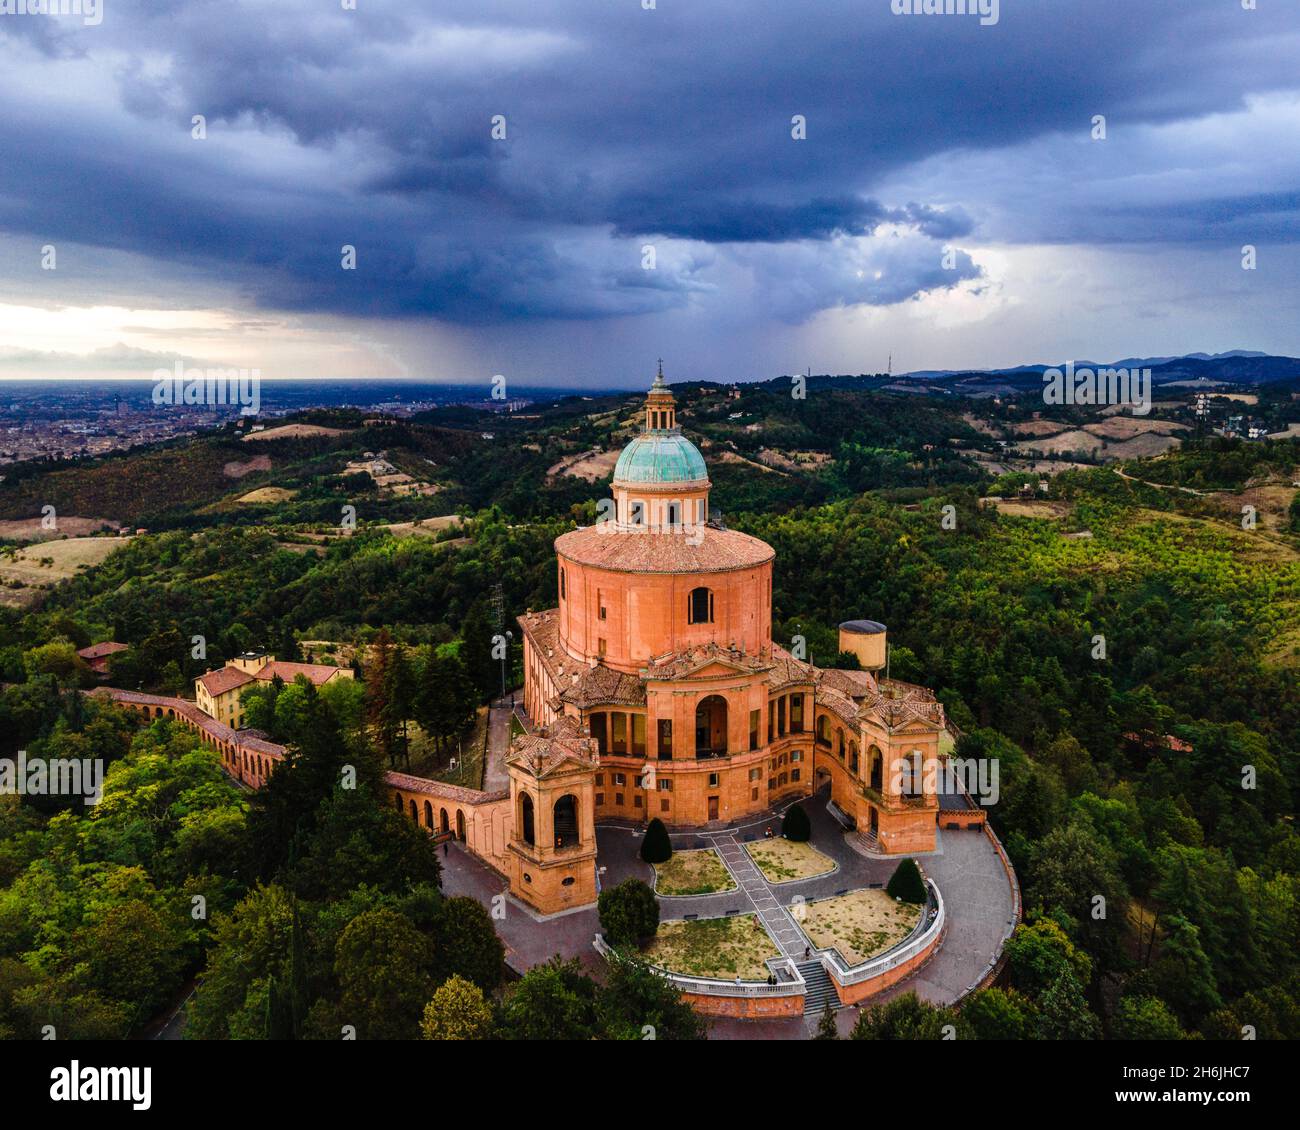 Sanctuary of Madonna di St. Luca, the symbol of Bologna, at sunset during a storm, Bologna, Emilia Romagna, Italy, Europe Stock Photo